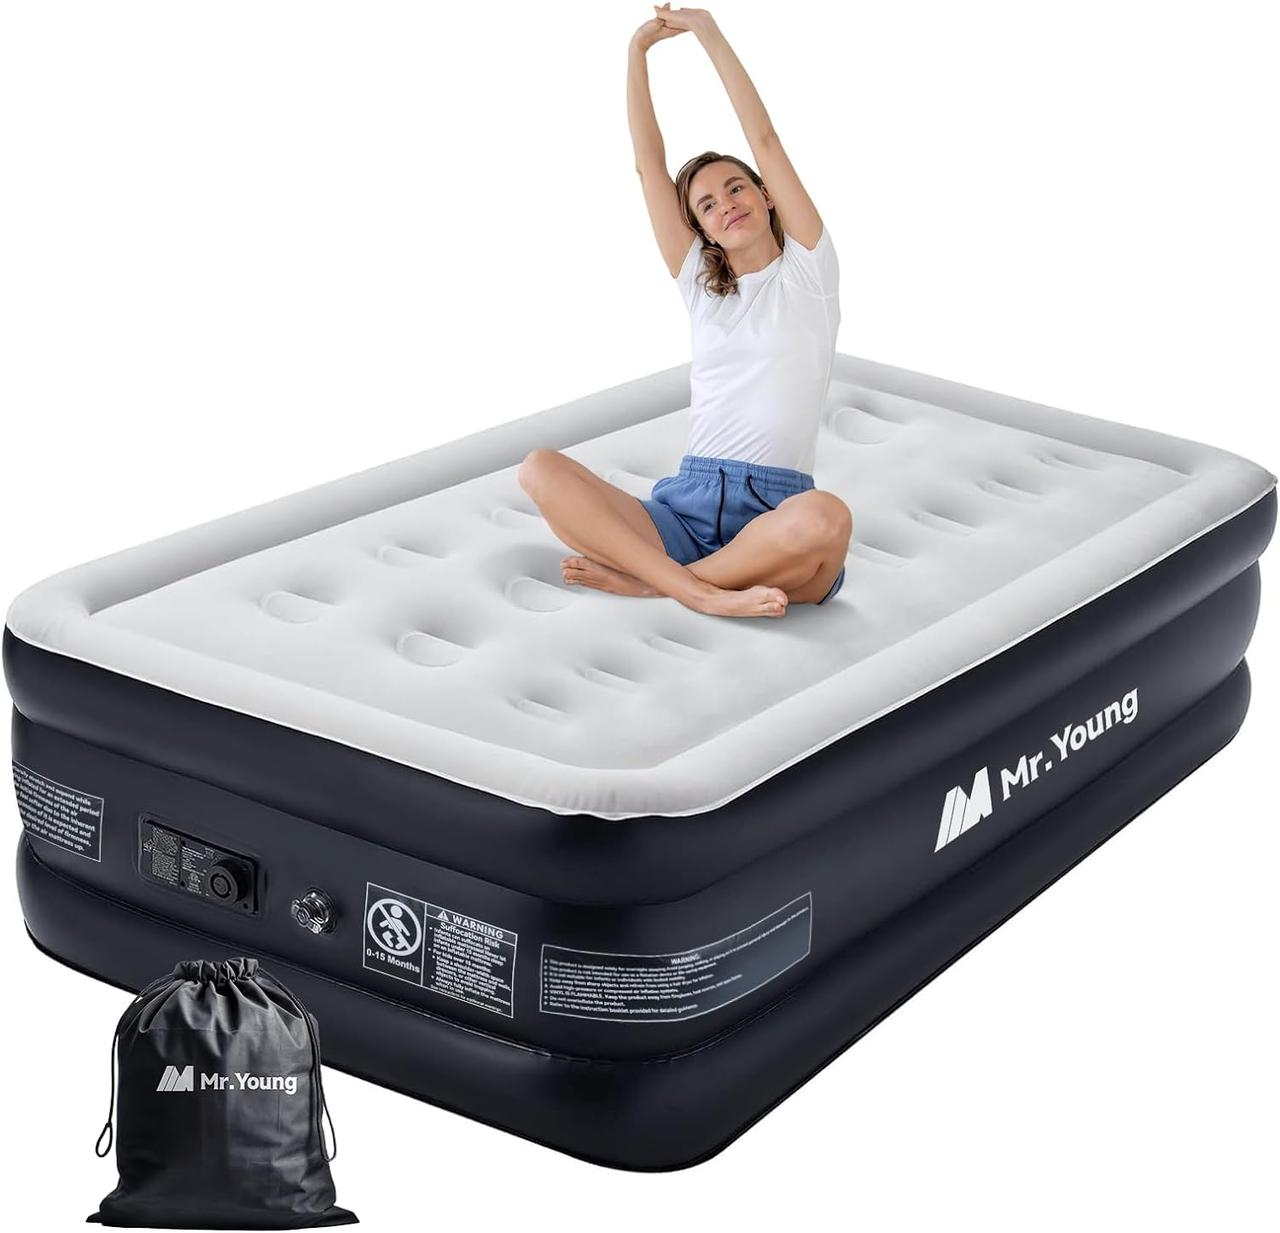 Twin Air Mattress with Built-in Pump for Guest, 18" Tall Inflatable Air Bed with Carrying Bag for Camping, - фото 1 - id-p2180708802